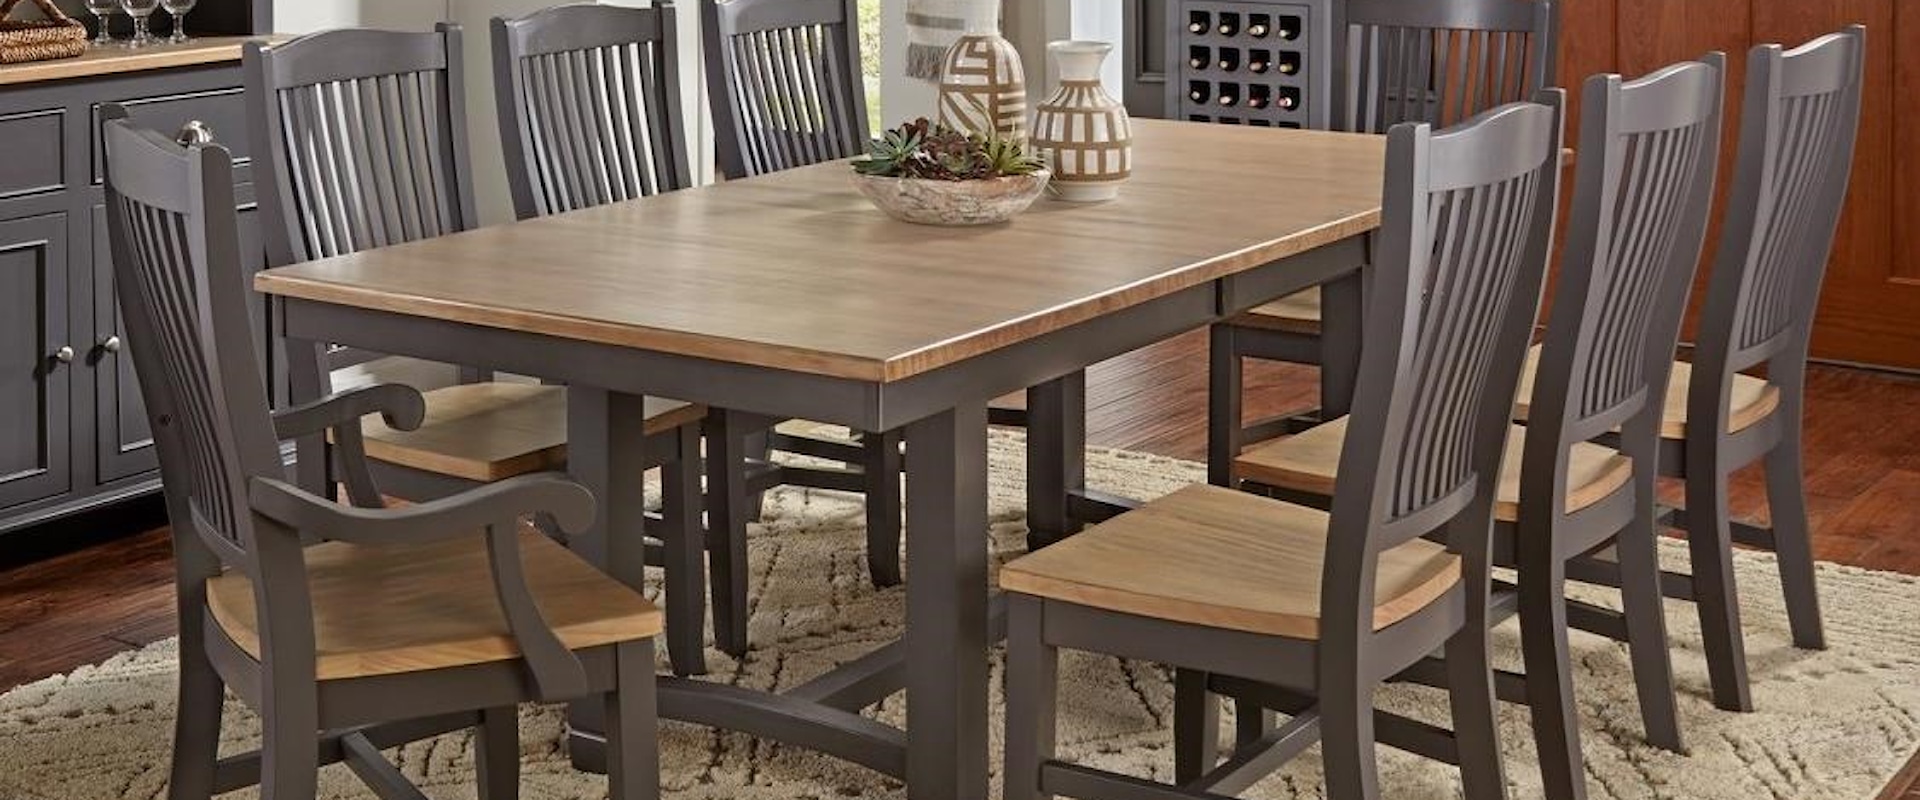 9 Pc Table & Chair Set- (Trestle Table, 6 Side Chairs & 2 Arm Chairs)